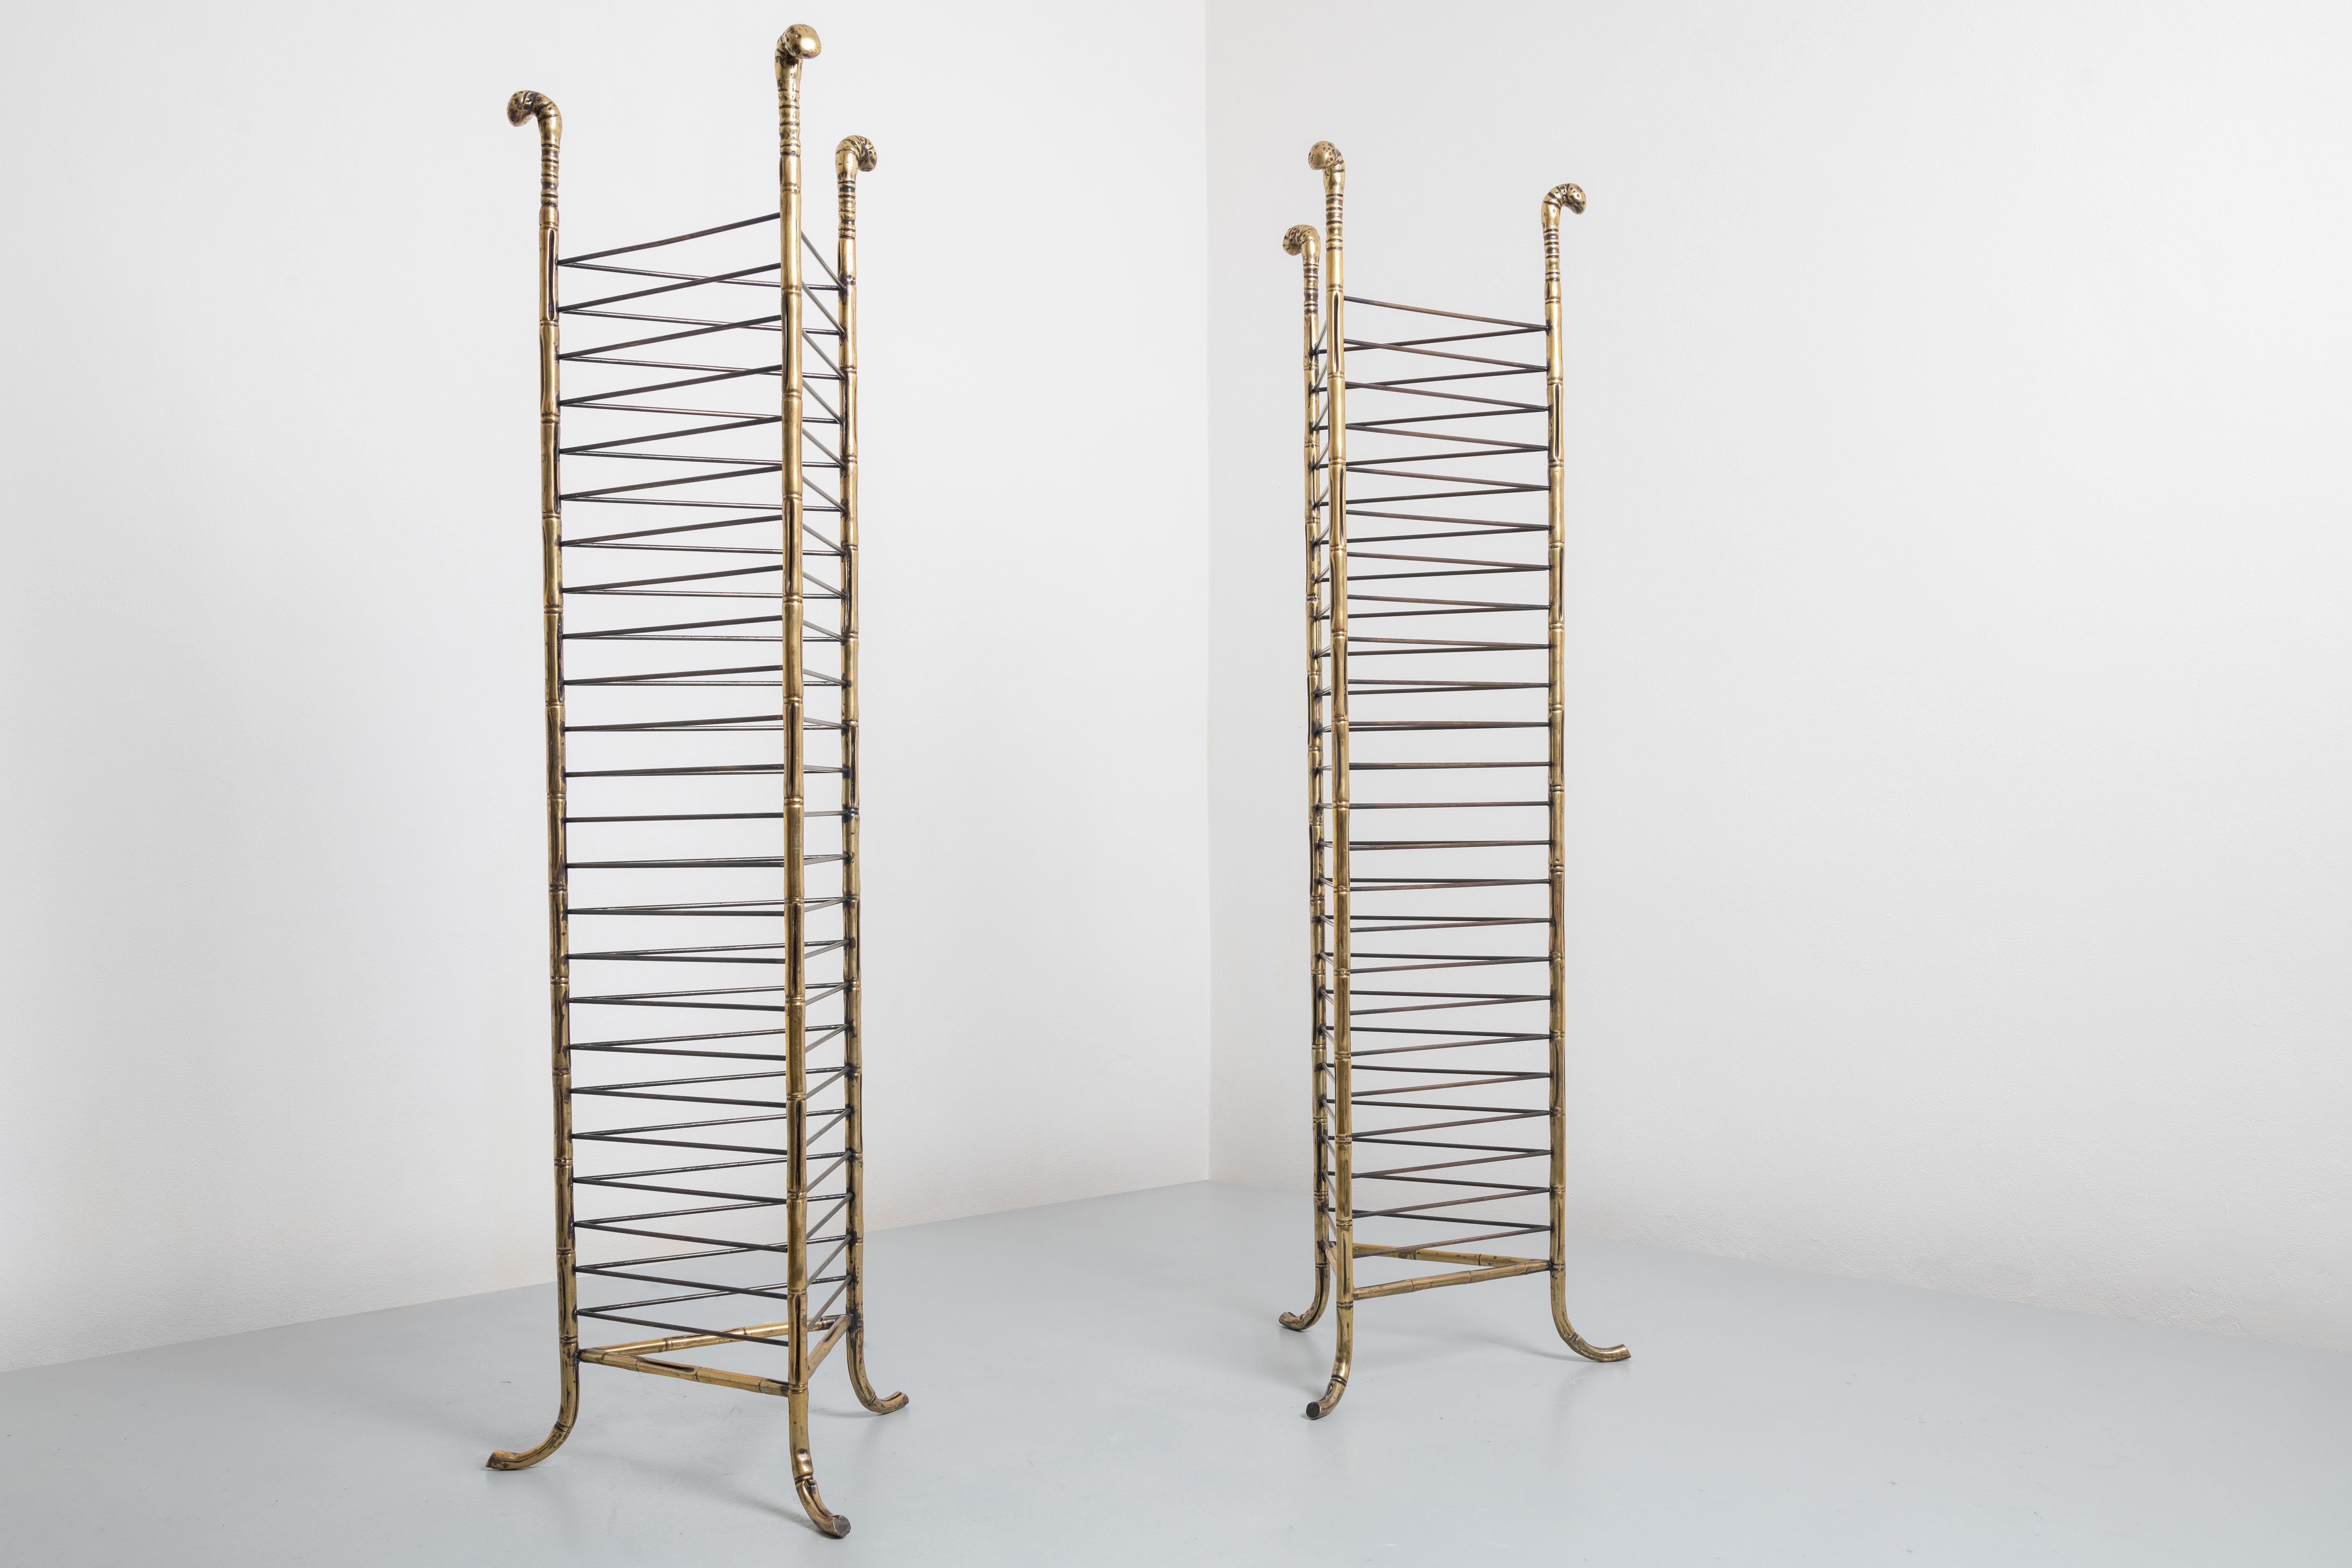 French-made and with a light and elegant taste, they are suitable for many spaces and situations, useful as bookcases but also for records or video cassettes.
With a flashy look, the brass-coloured metal bookcase will brighten up your decor! Thanks